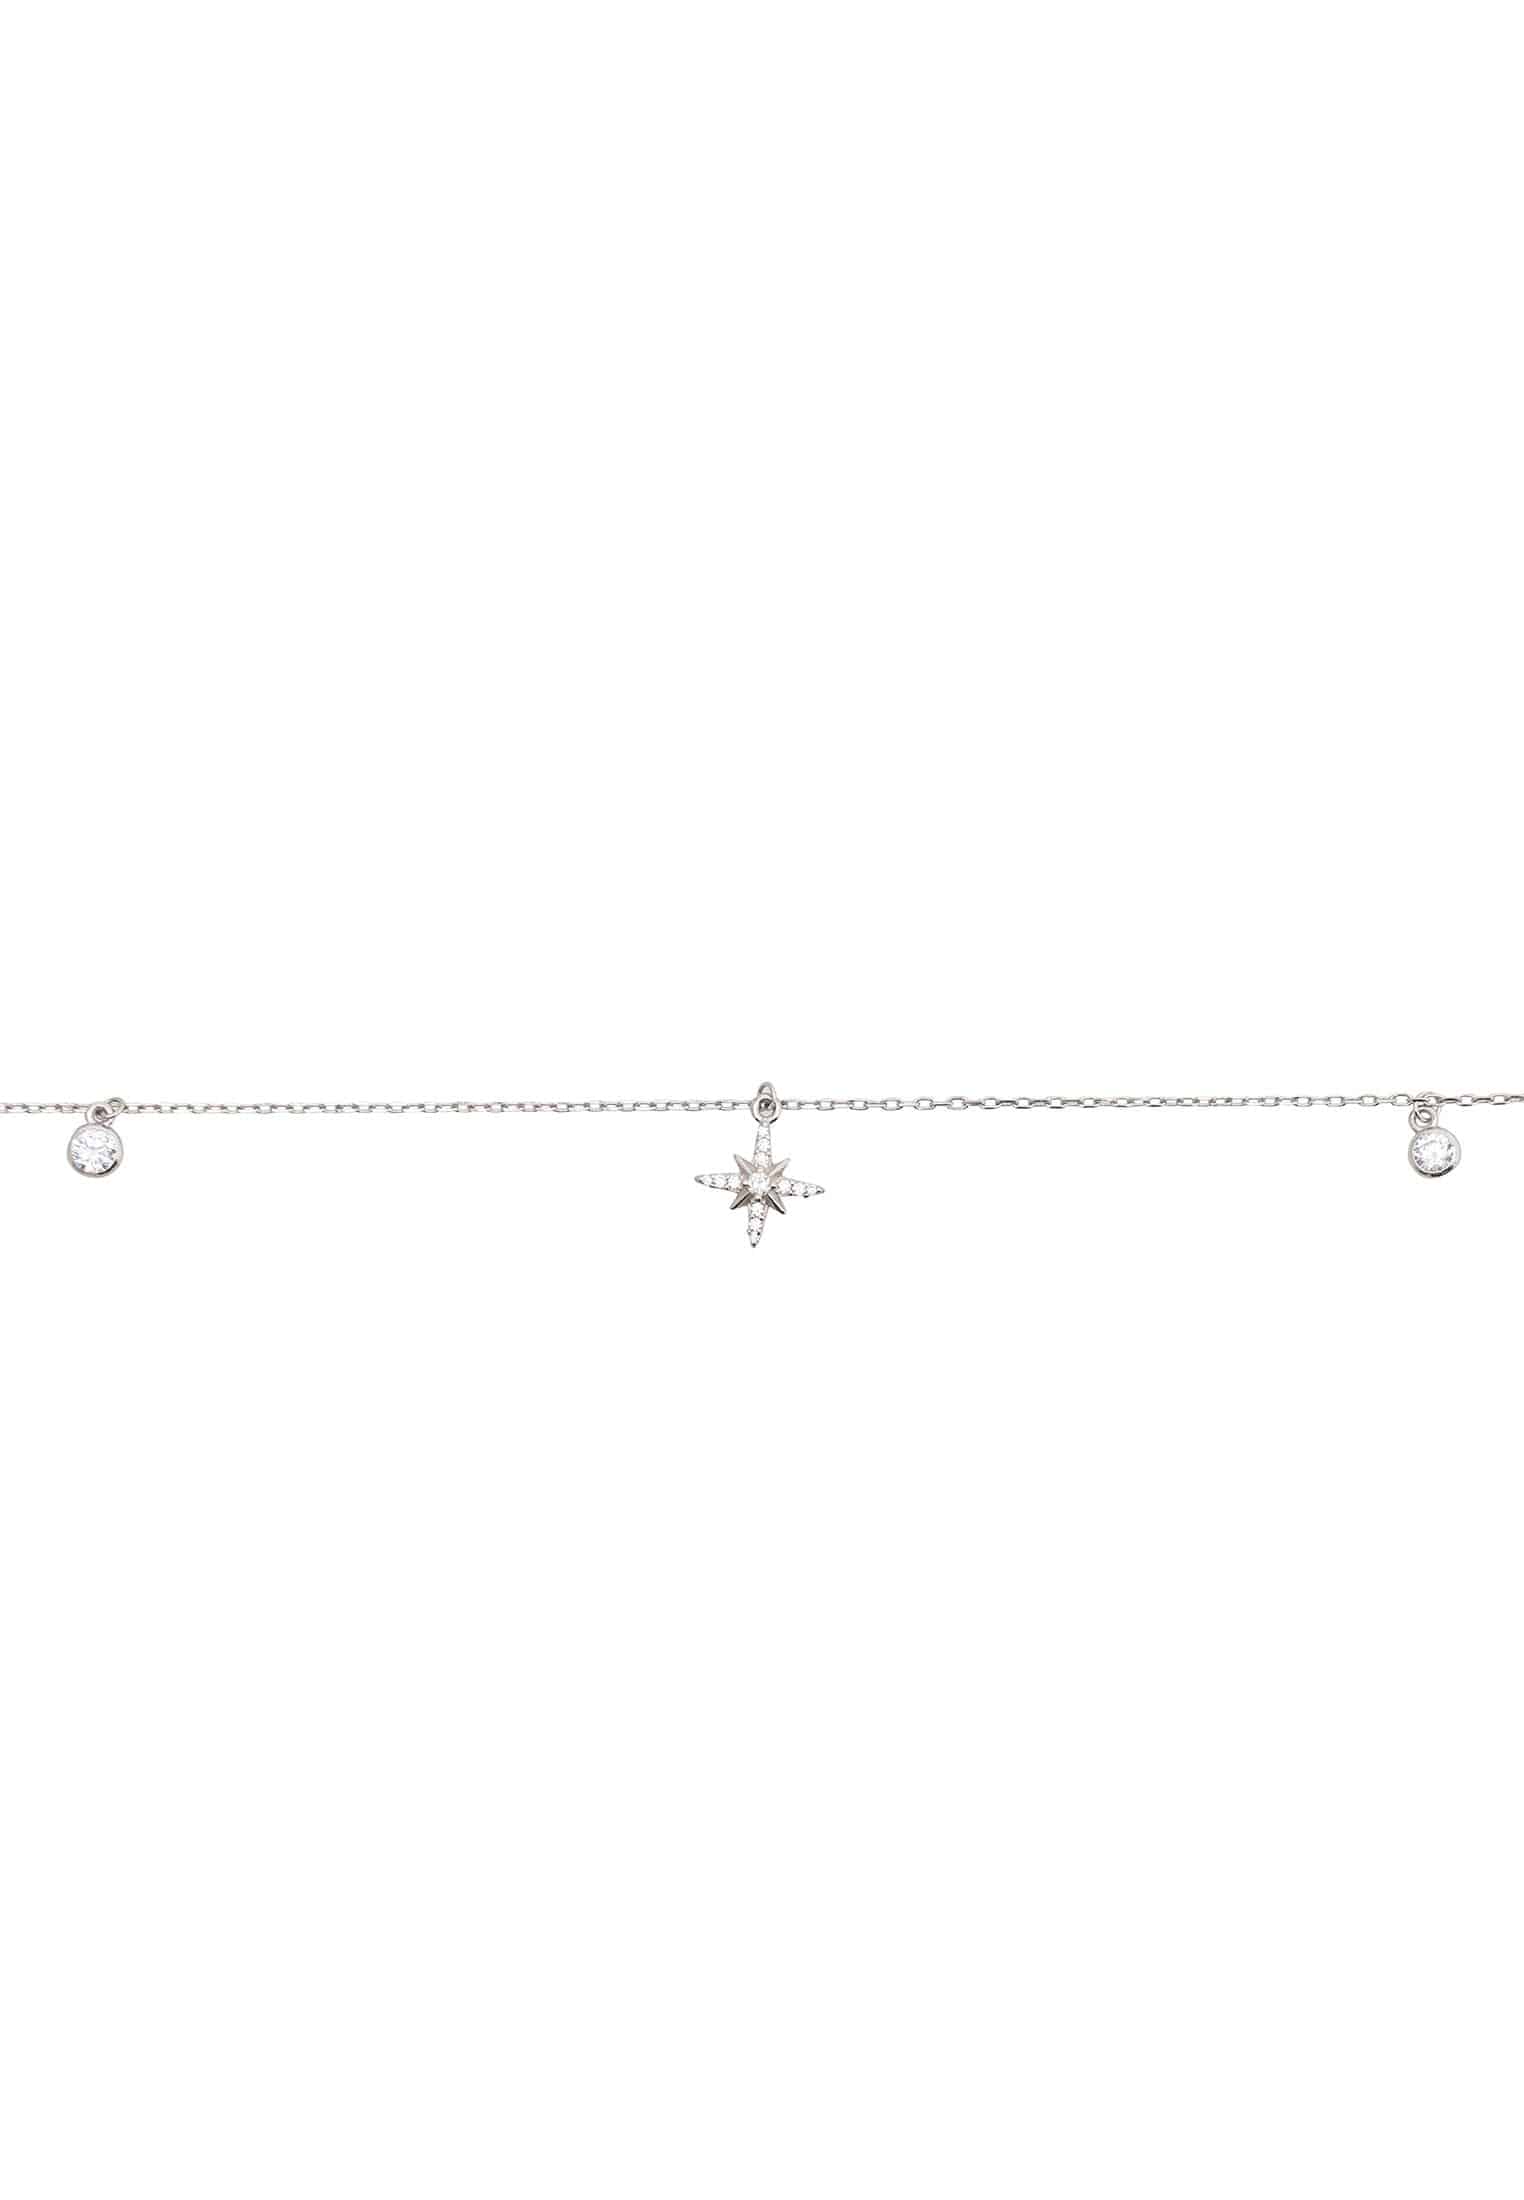 Sparkling North Star Silver Anklet - Delicate Jewelry for Travelers and Pool Lovers - Jewelry & Watches - Bijou Her -  -  - 